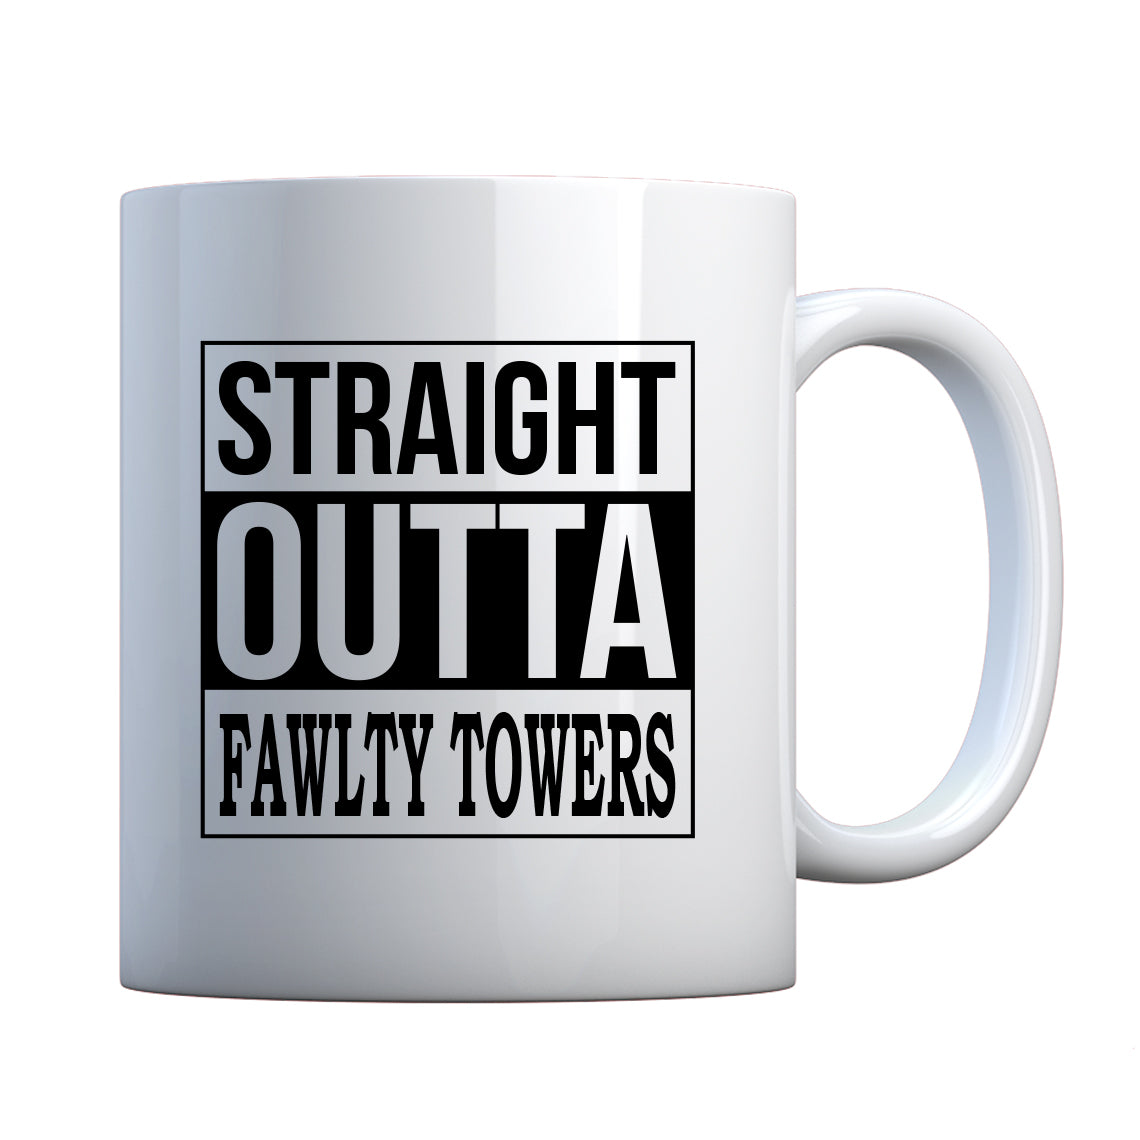 Straight Outta Fawlty Towers Ceramic Gift Mug